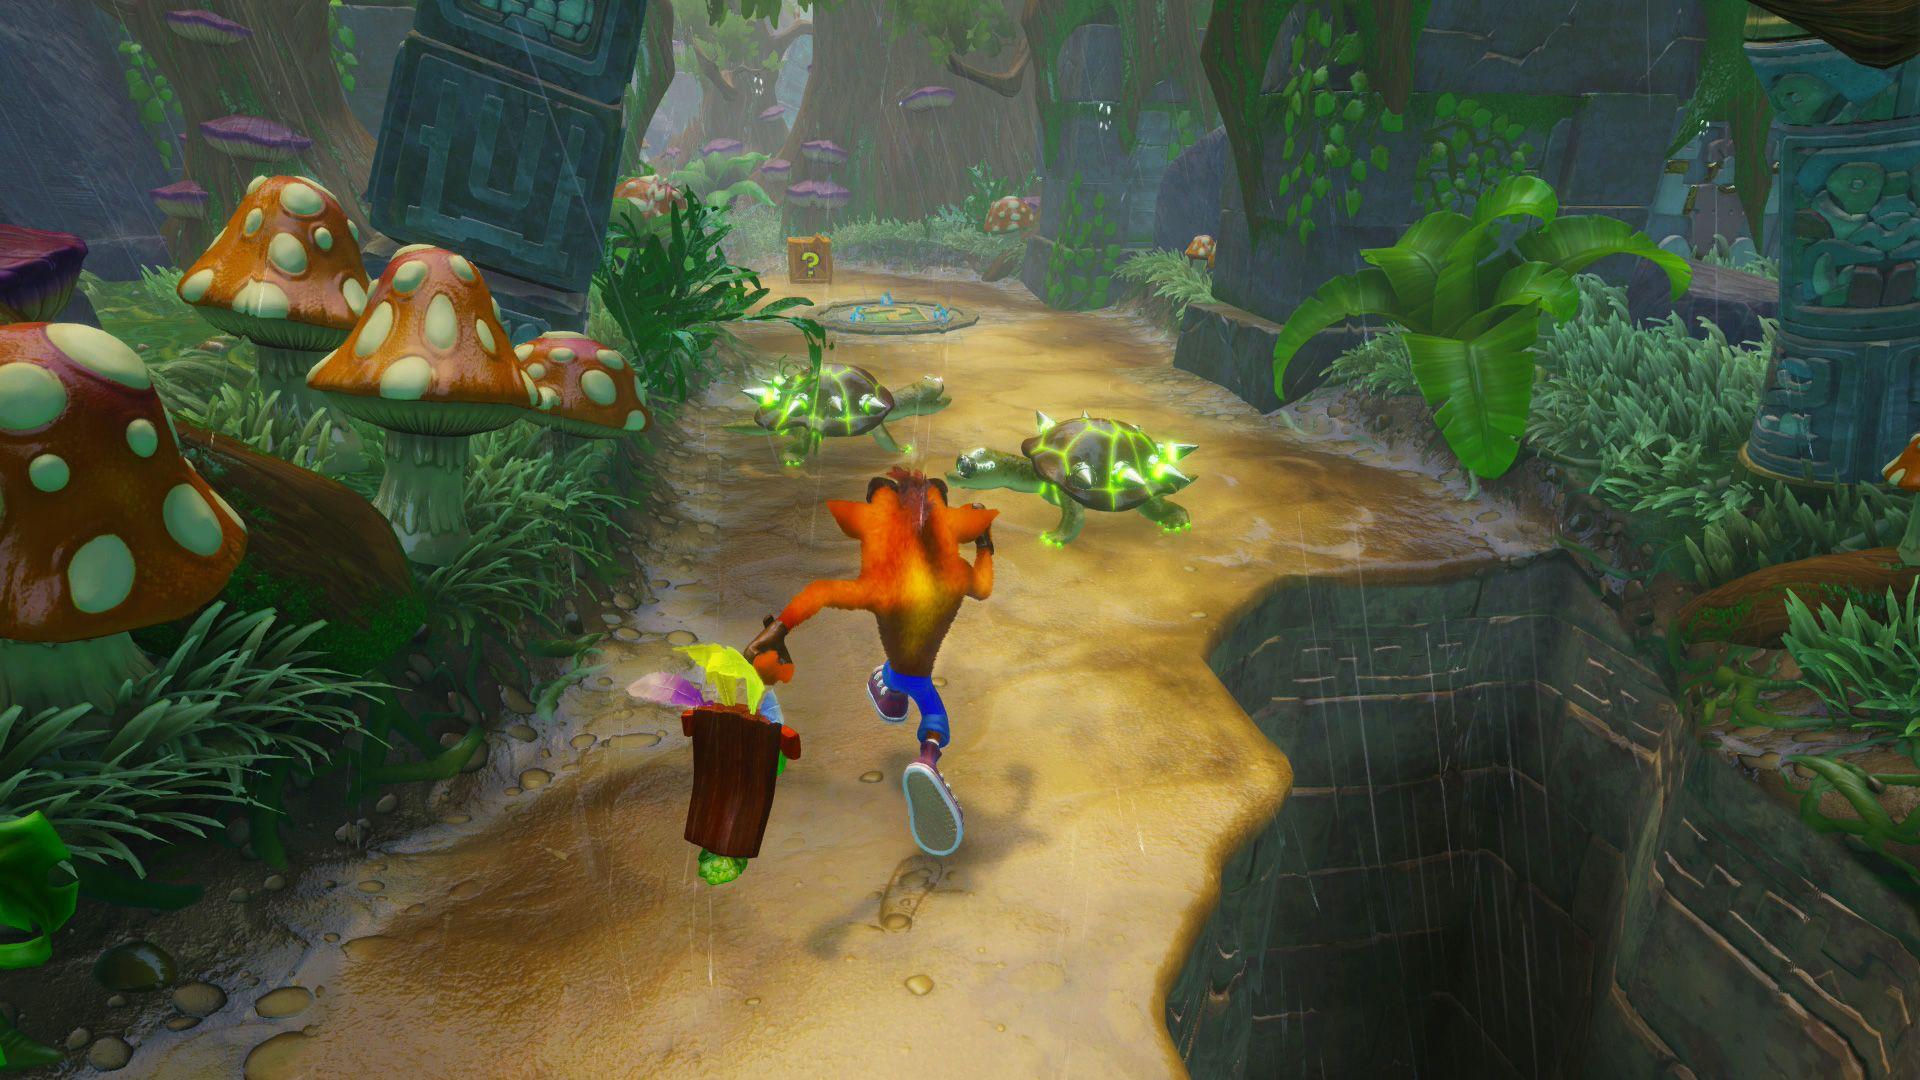 Review: Warp back in time with the Crash Bandicoot N.Sane Trilogy